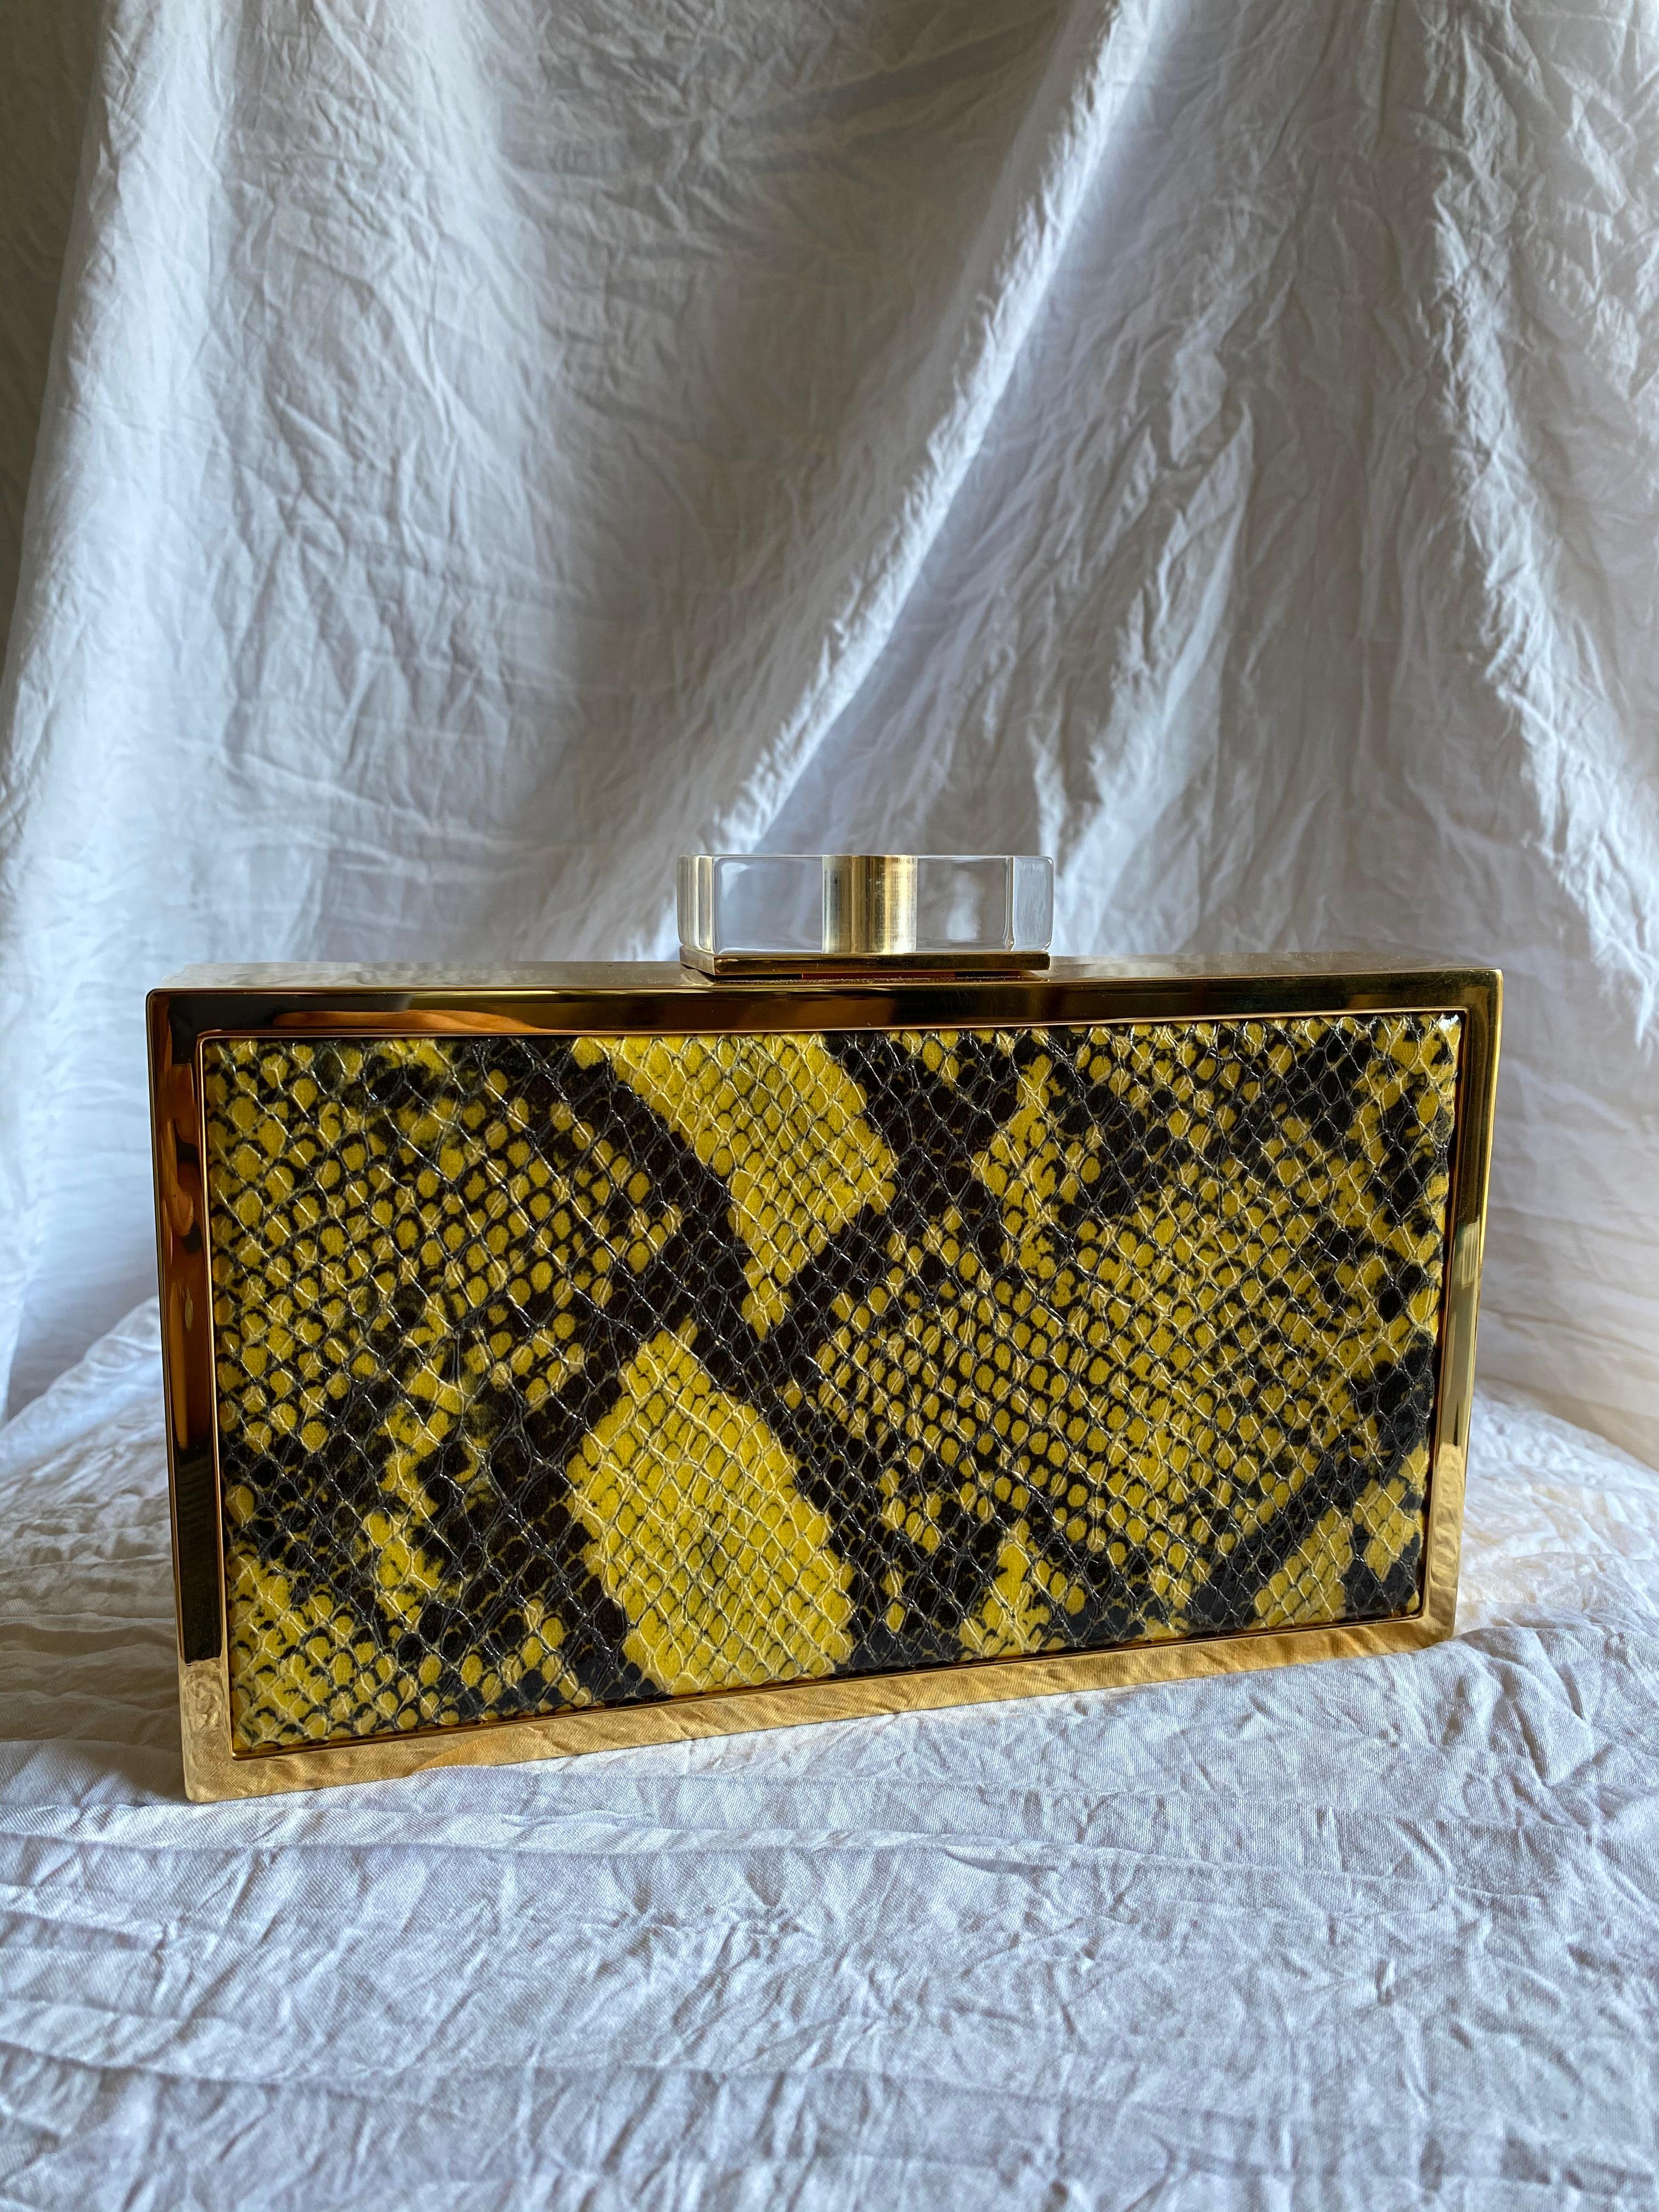 Stella McCartney’s vegan snake skin leather embossed and set into a reflective gold-tone frame with an optional chain. 

Condition: Good used condition. 
Exterior: Slightly uneven closure.
Interior: Lined with faux suede.
Made In: Italy
Serial